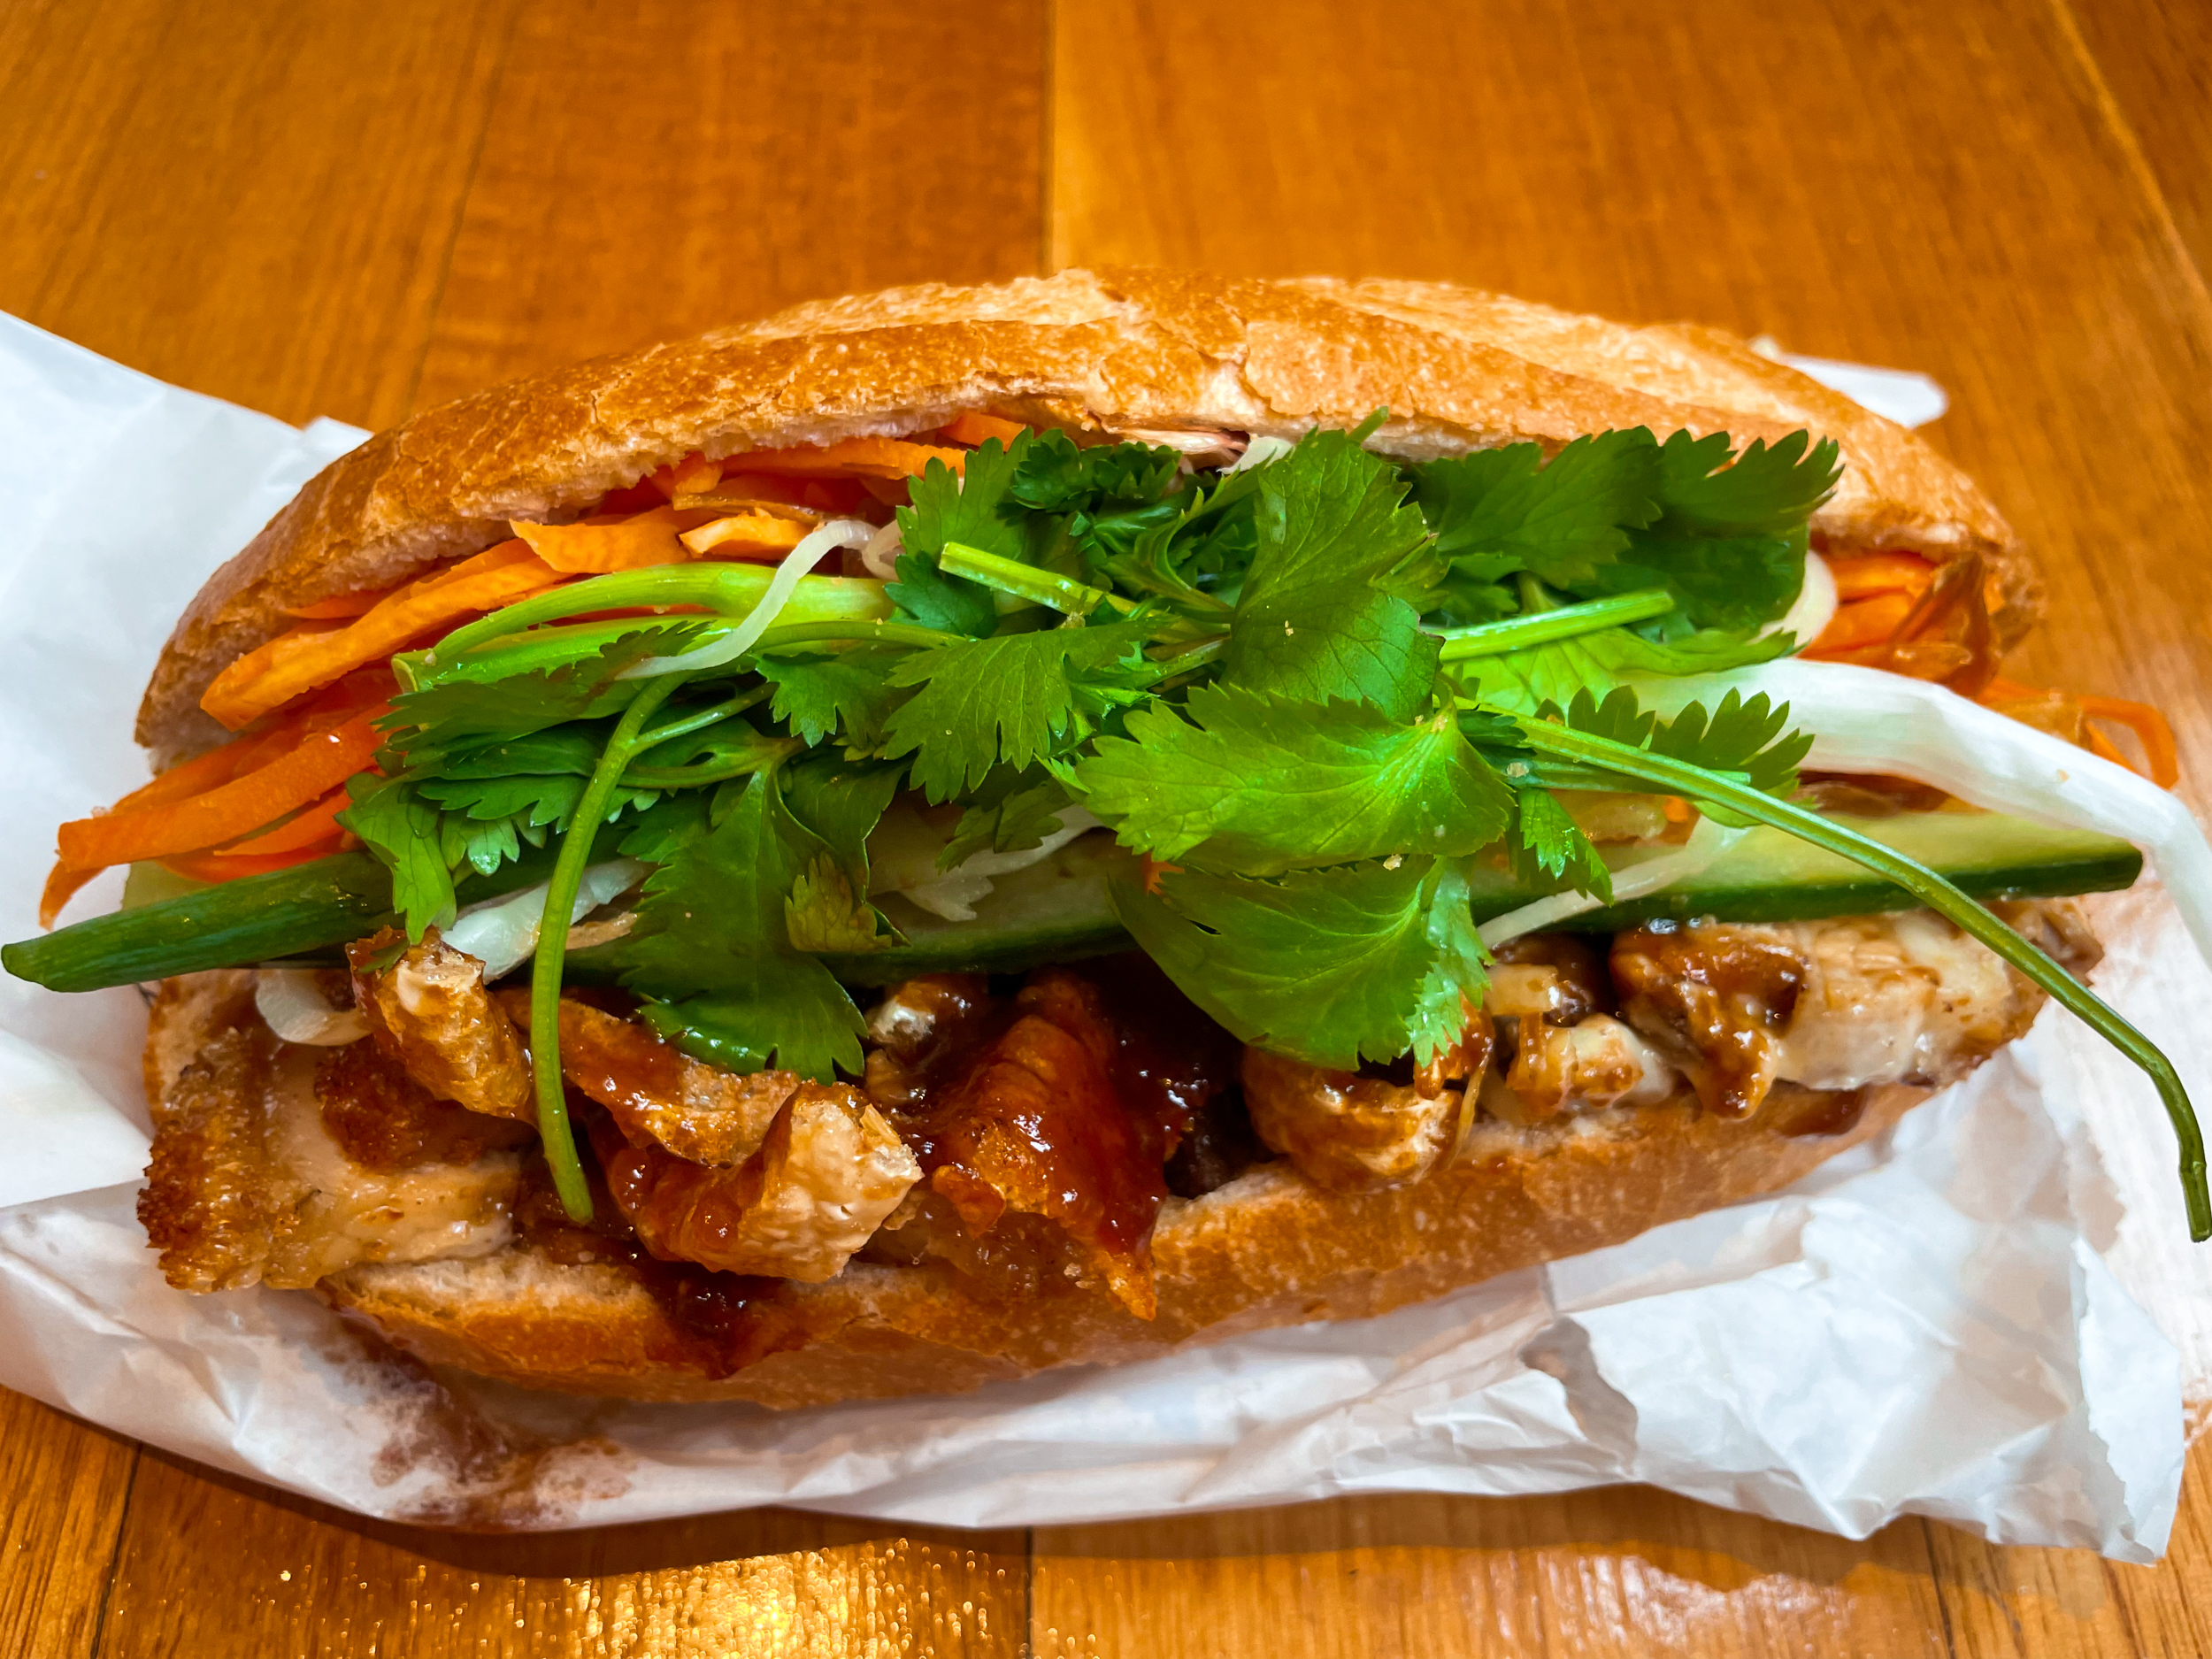 Banh mi bread roll with pork, coriander, and other fillings inside. Sitting on paper bag on wooden table